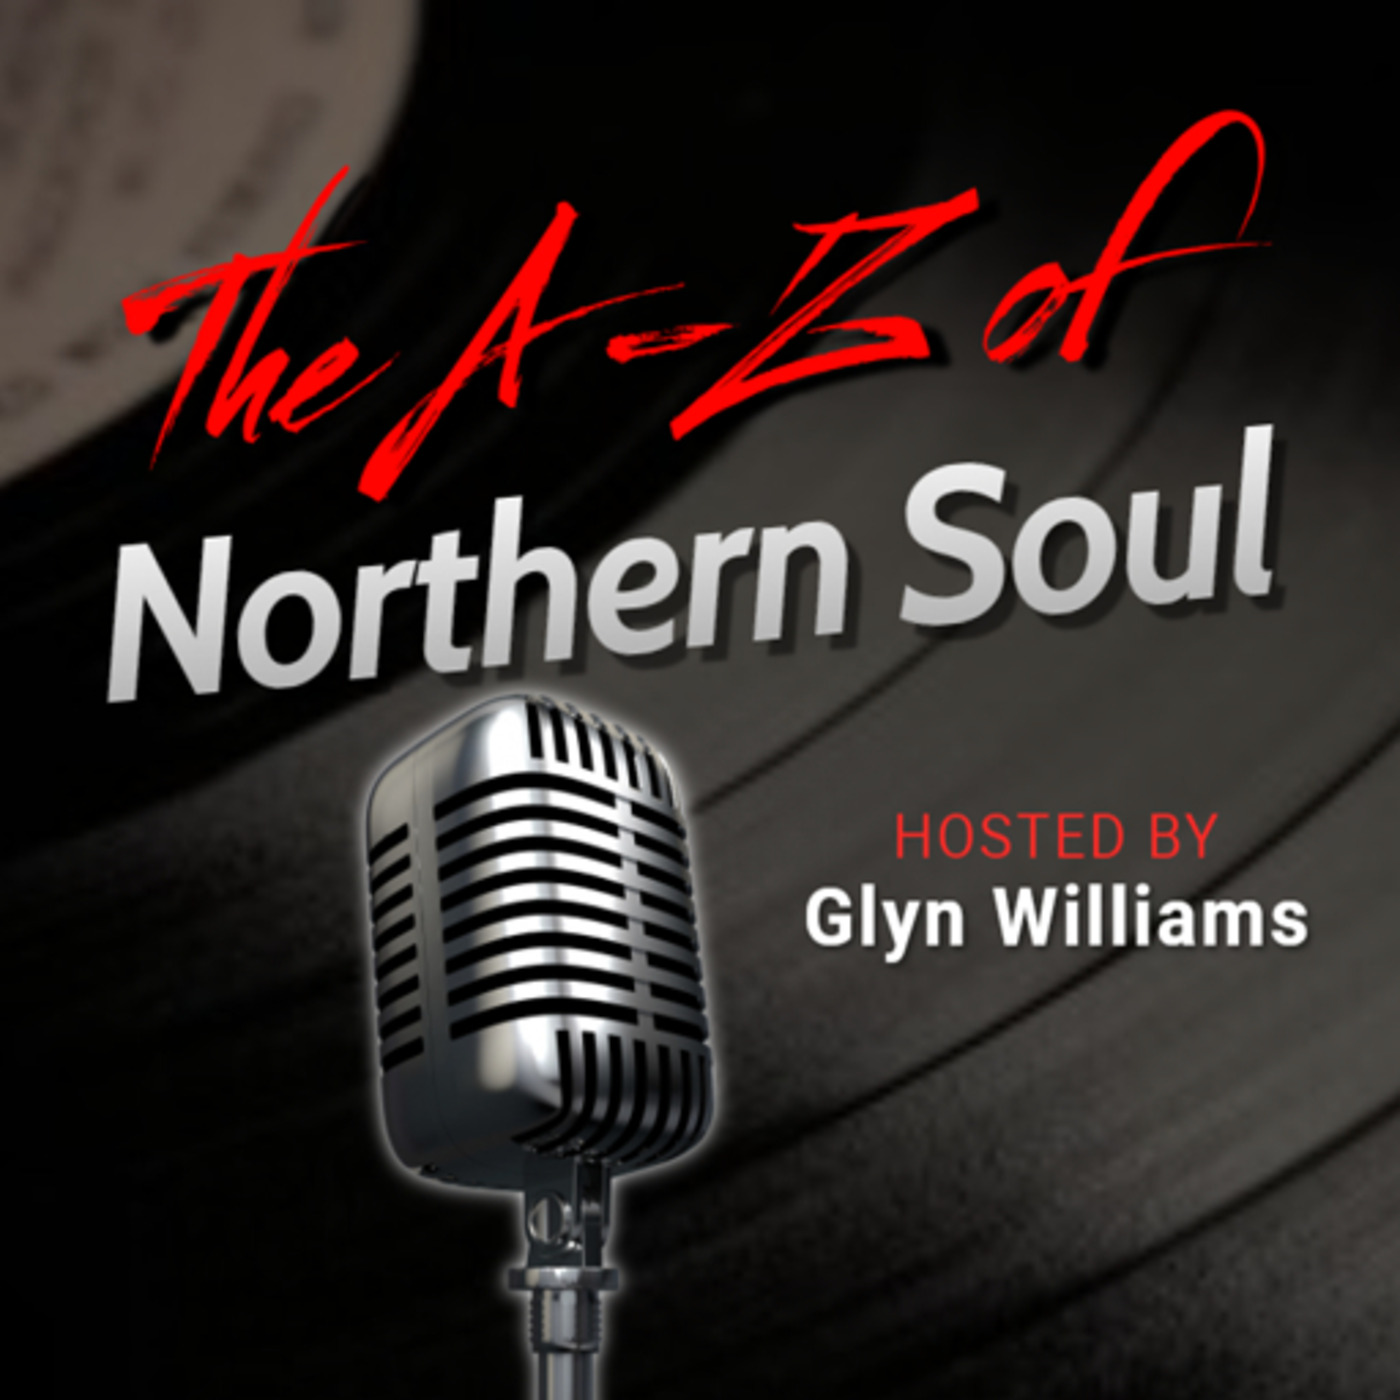 The A-Z of Northern Soul E066